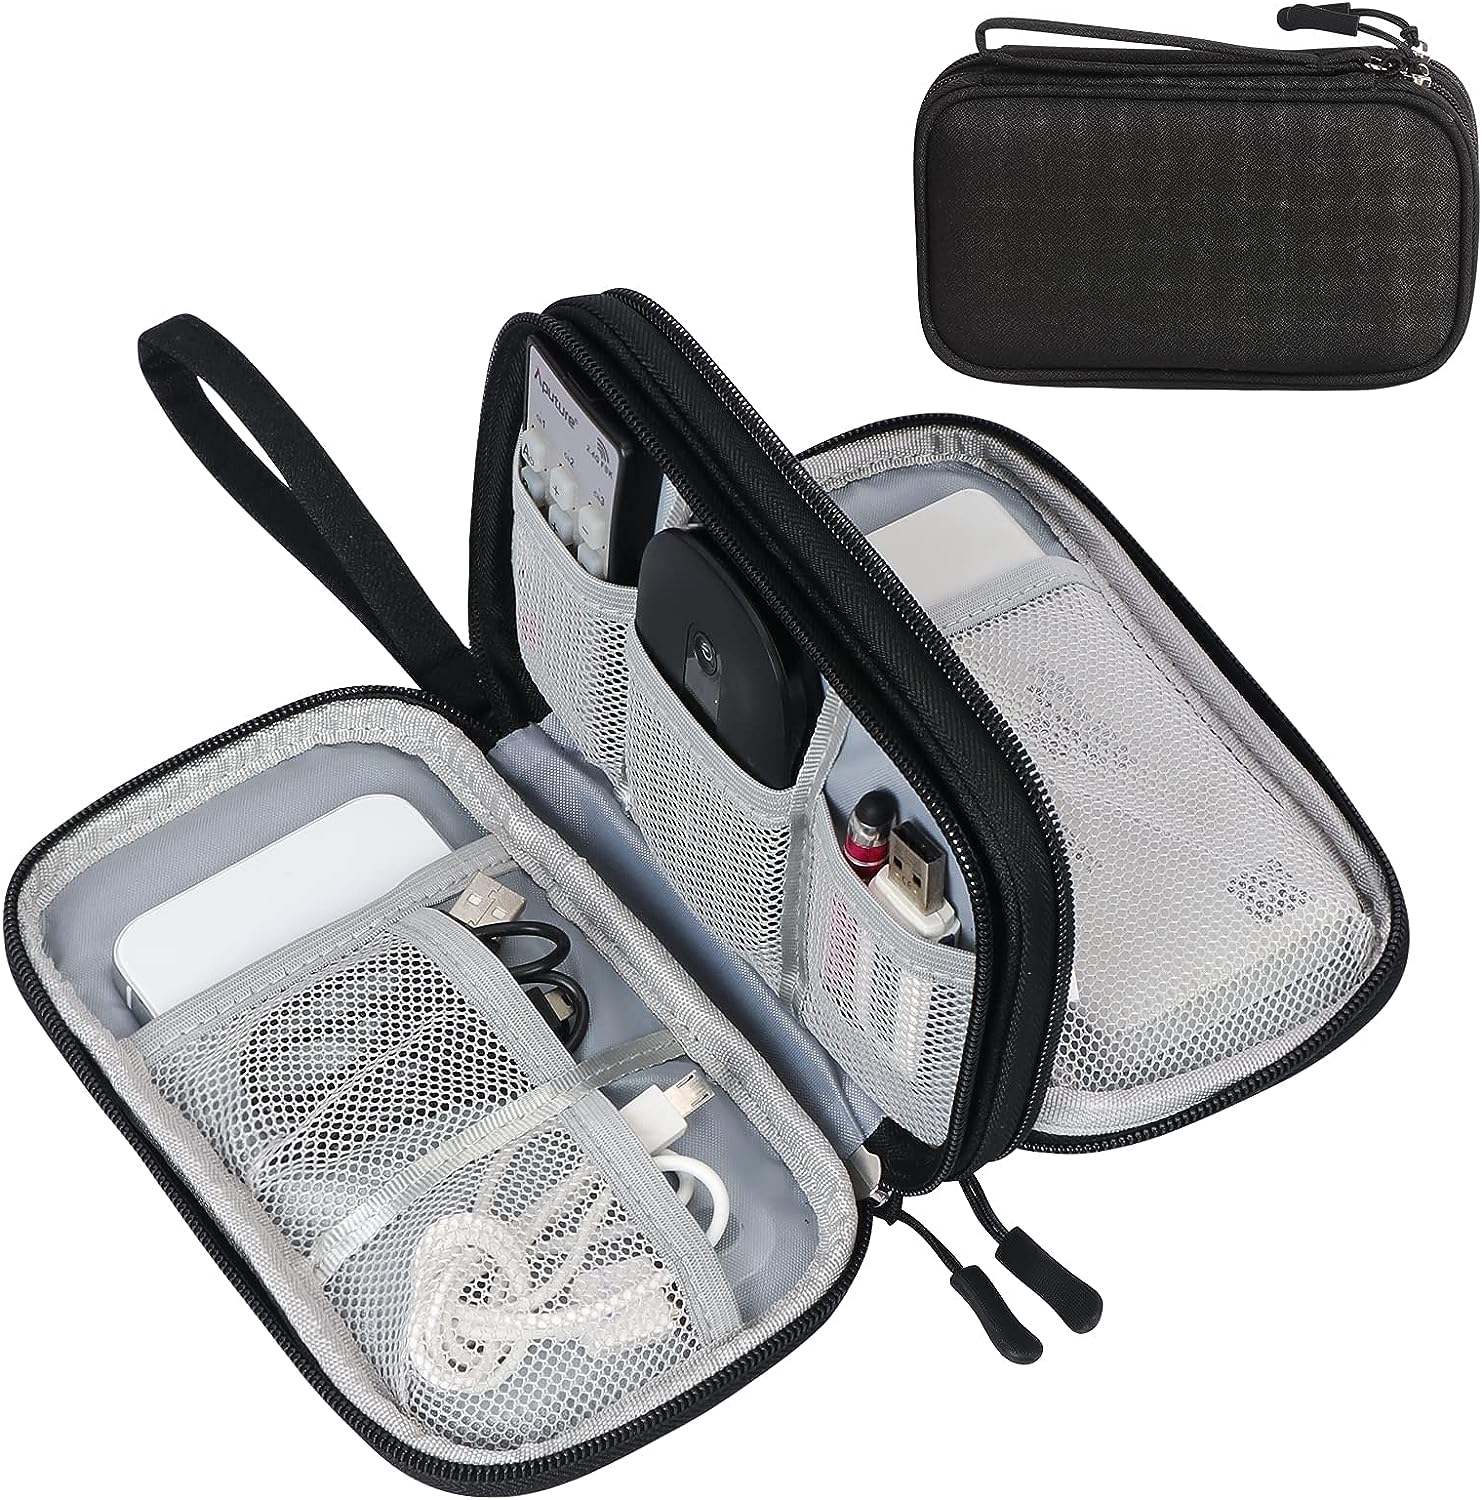 Cable organiser bag for travellers. Picture showing use of ease while travelling.